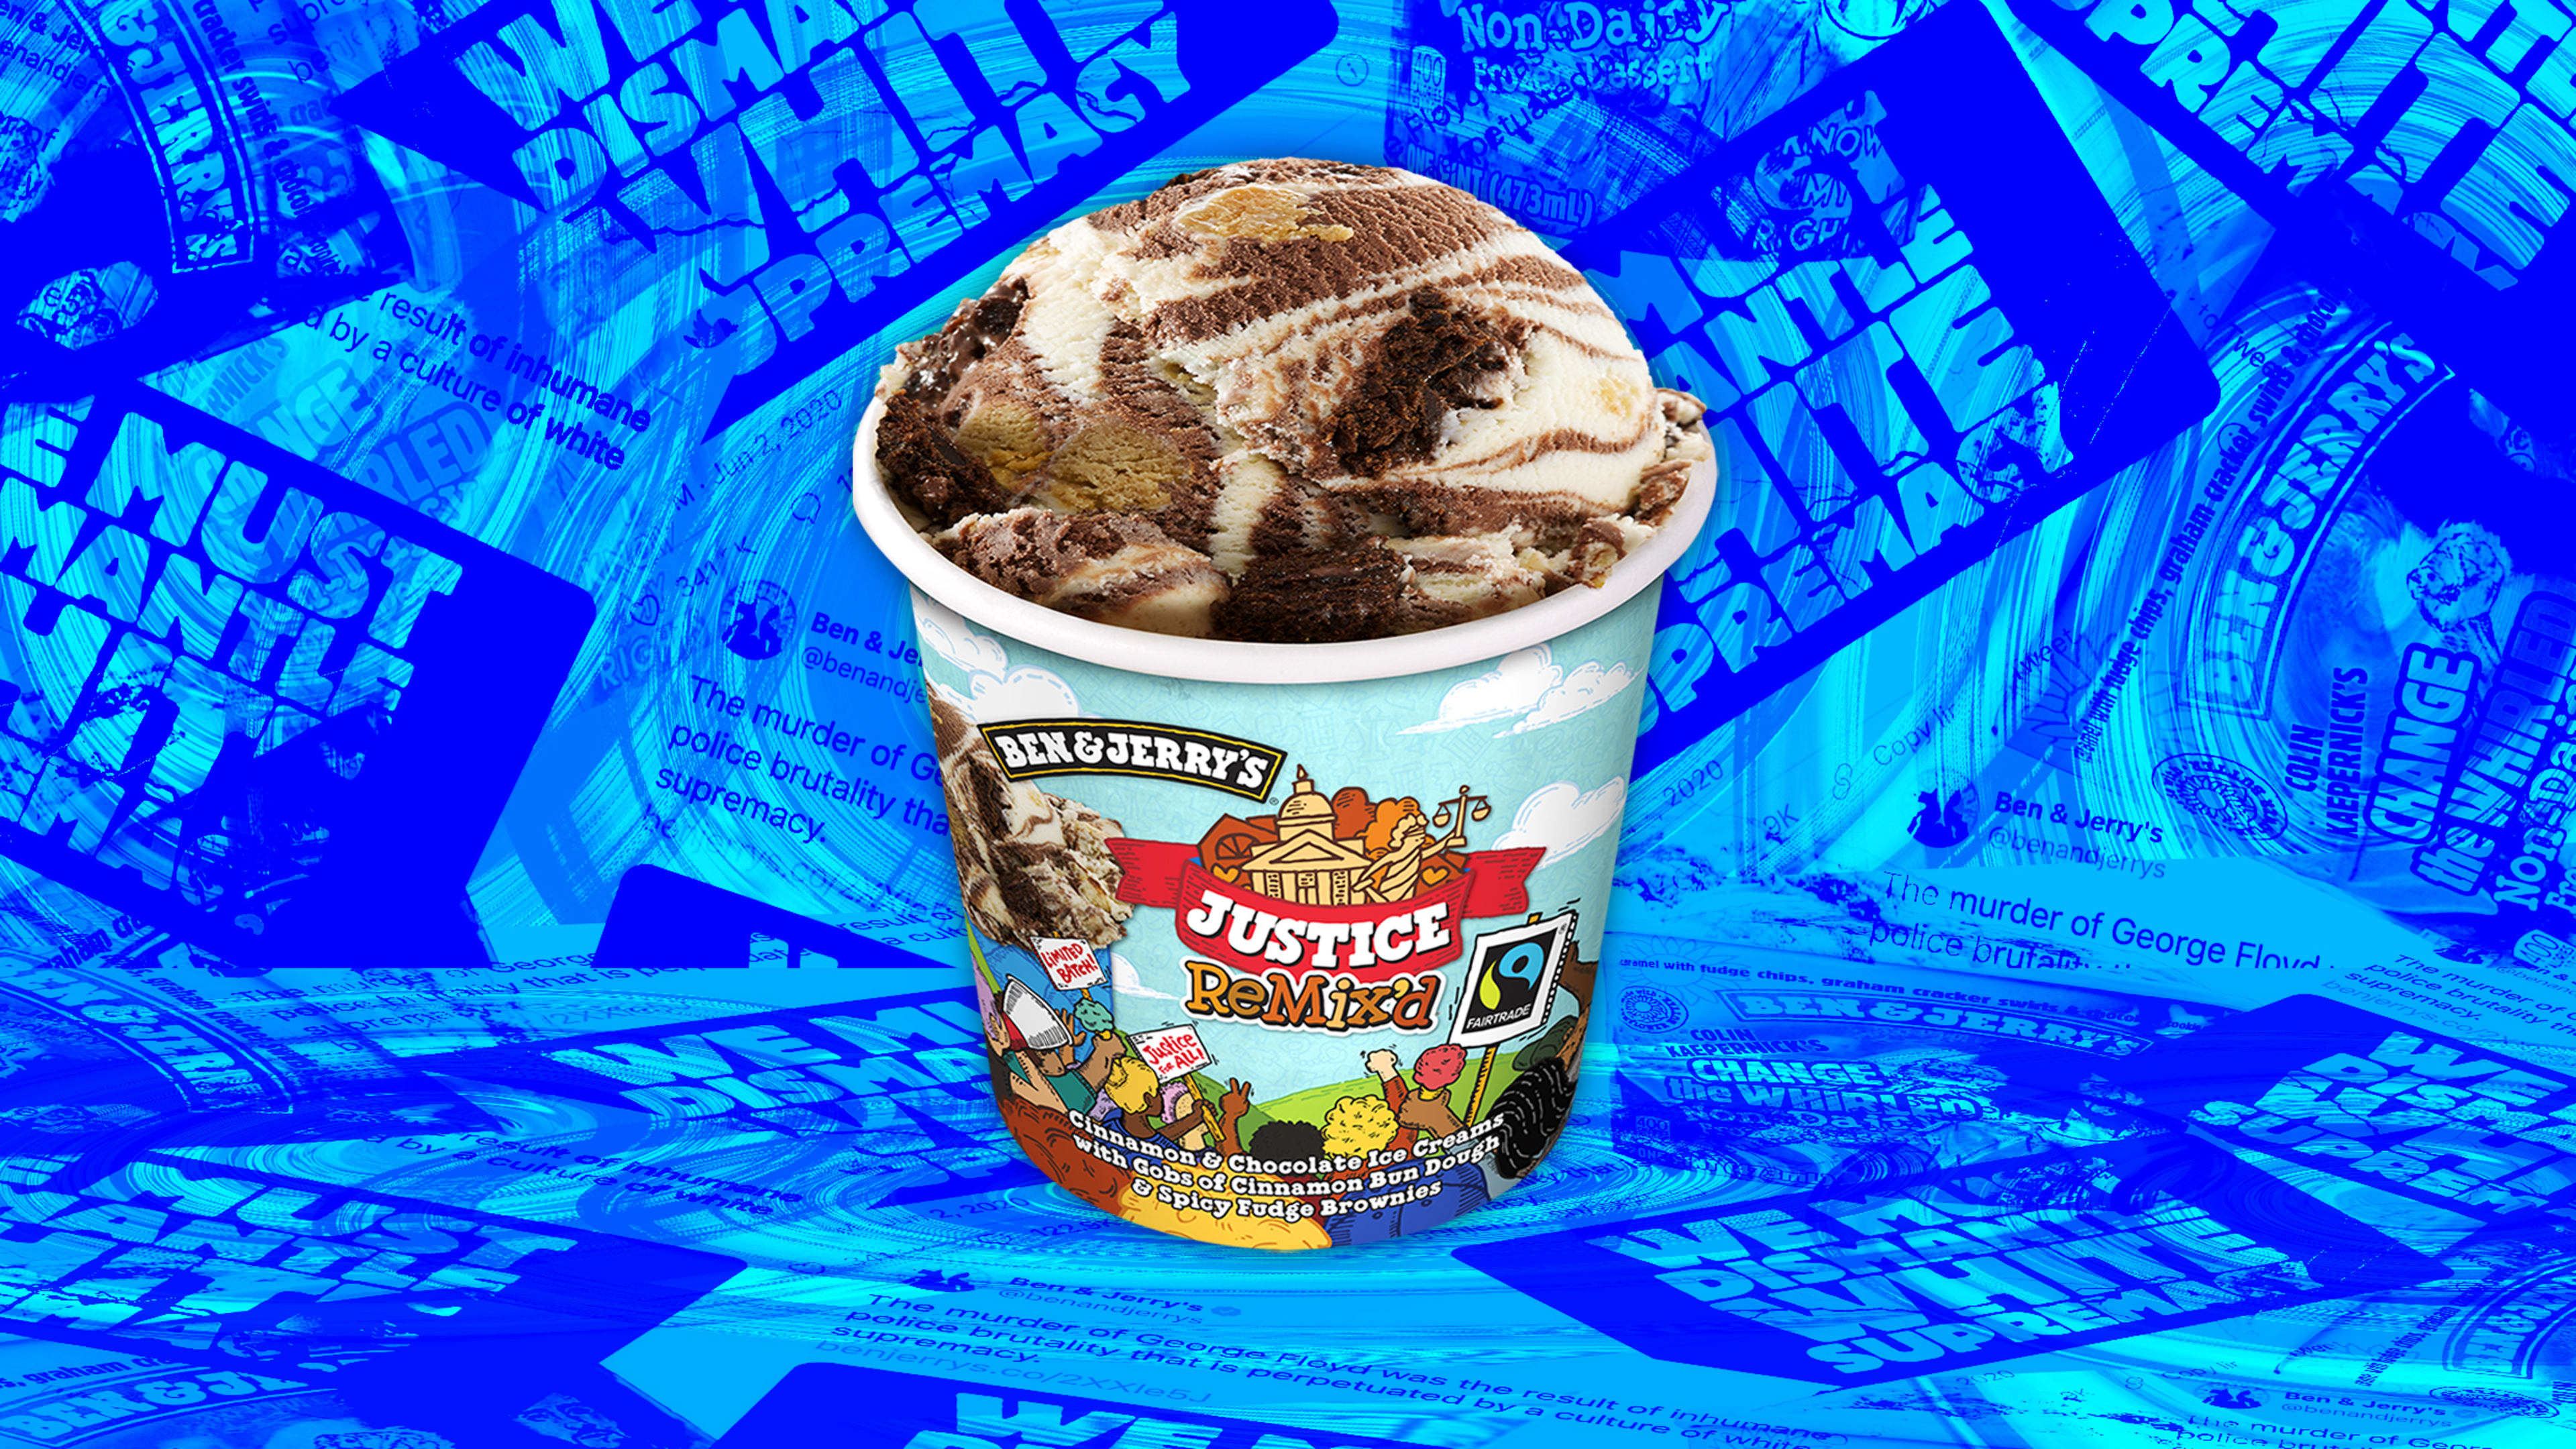 How Ben & Jerry’s has swirled social justice into its innovative business